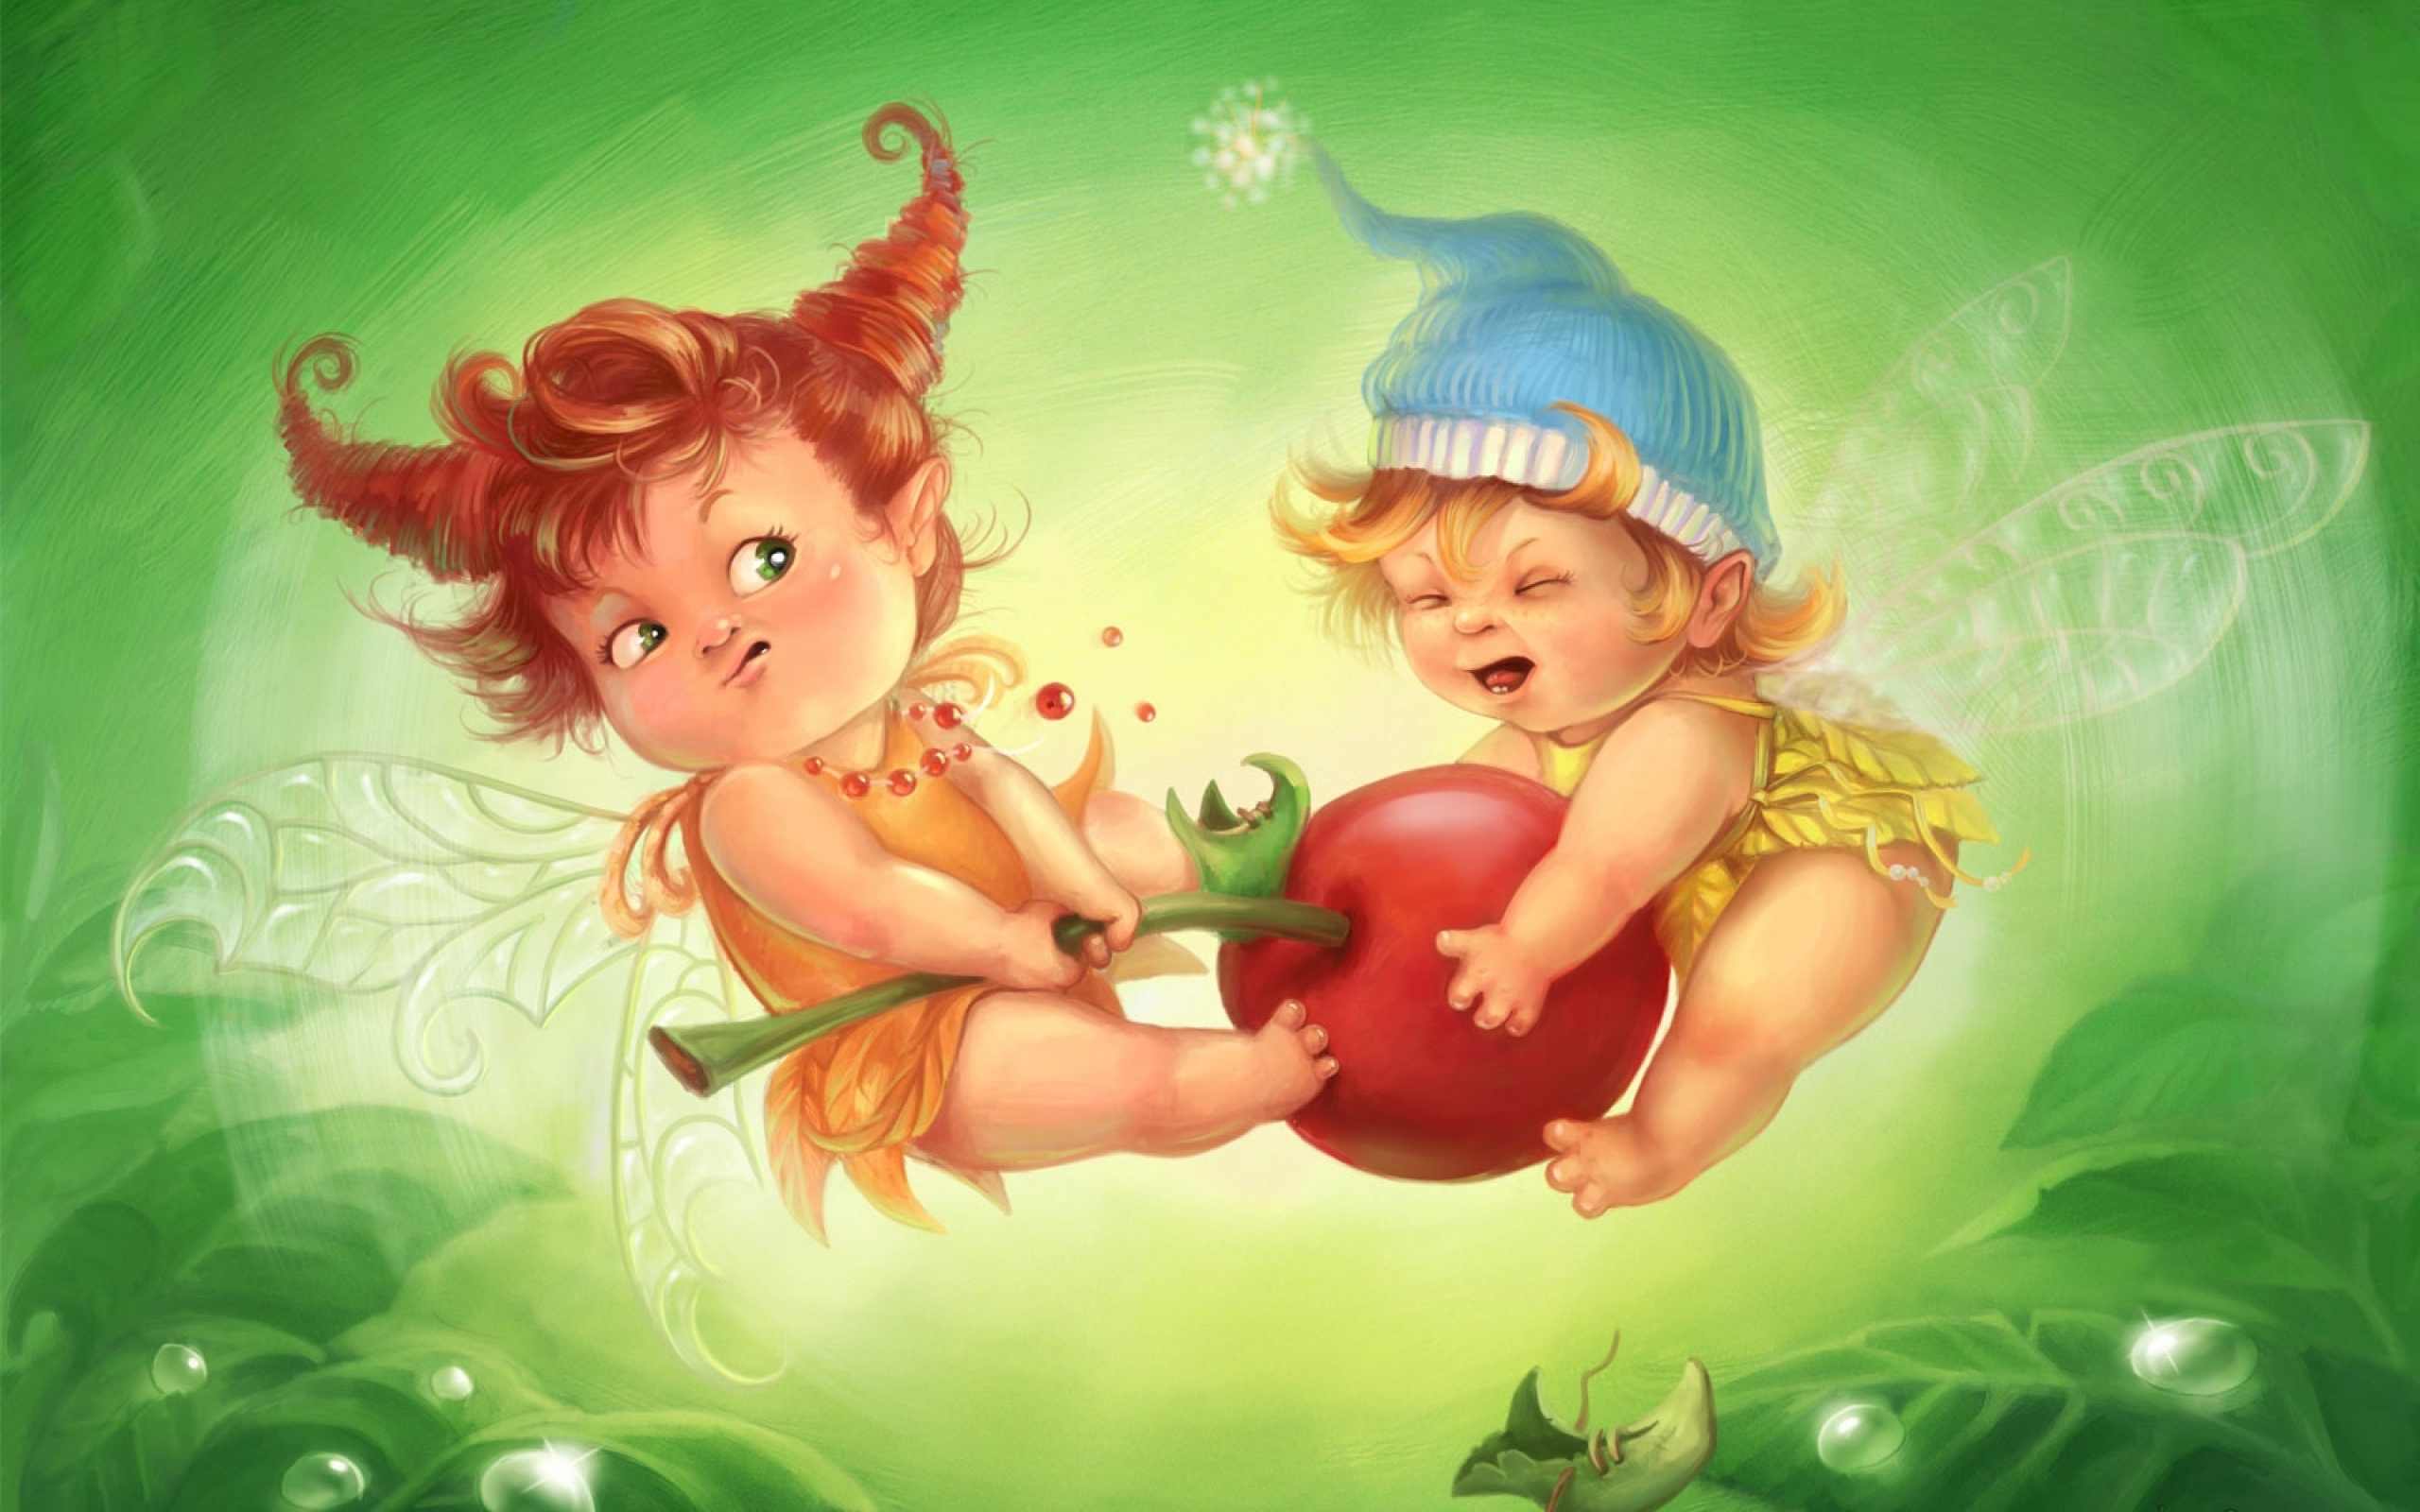 Fairy sitting on a cherry, bringing a touch of whimsical humor to this fantasy-inspired desktop wallpaper.